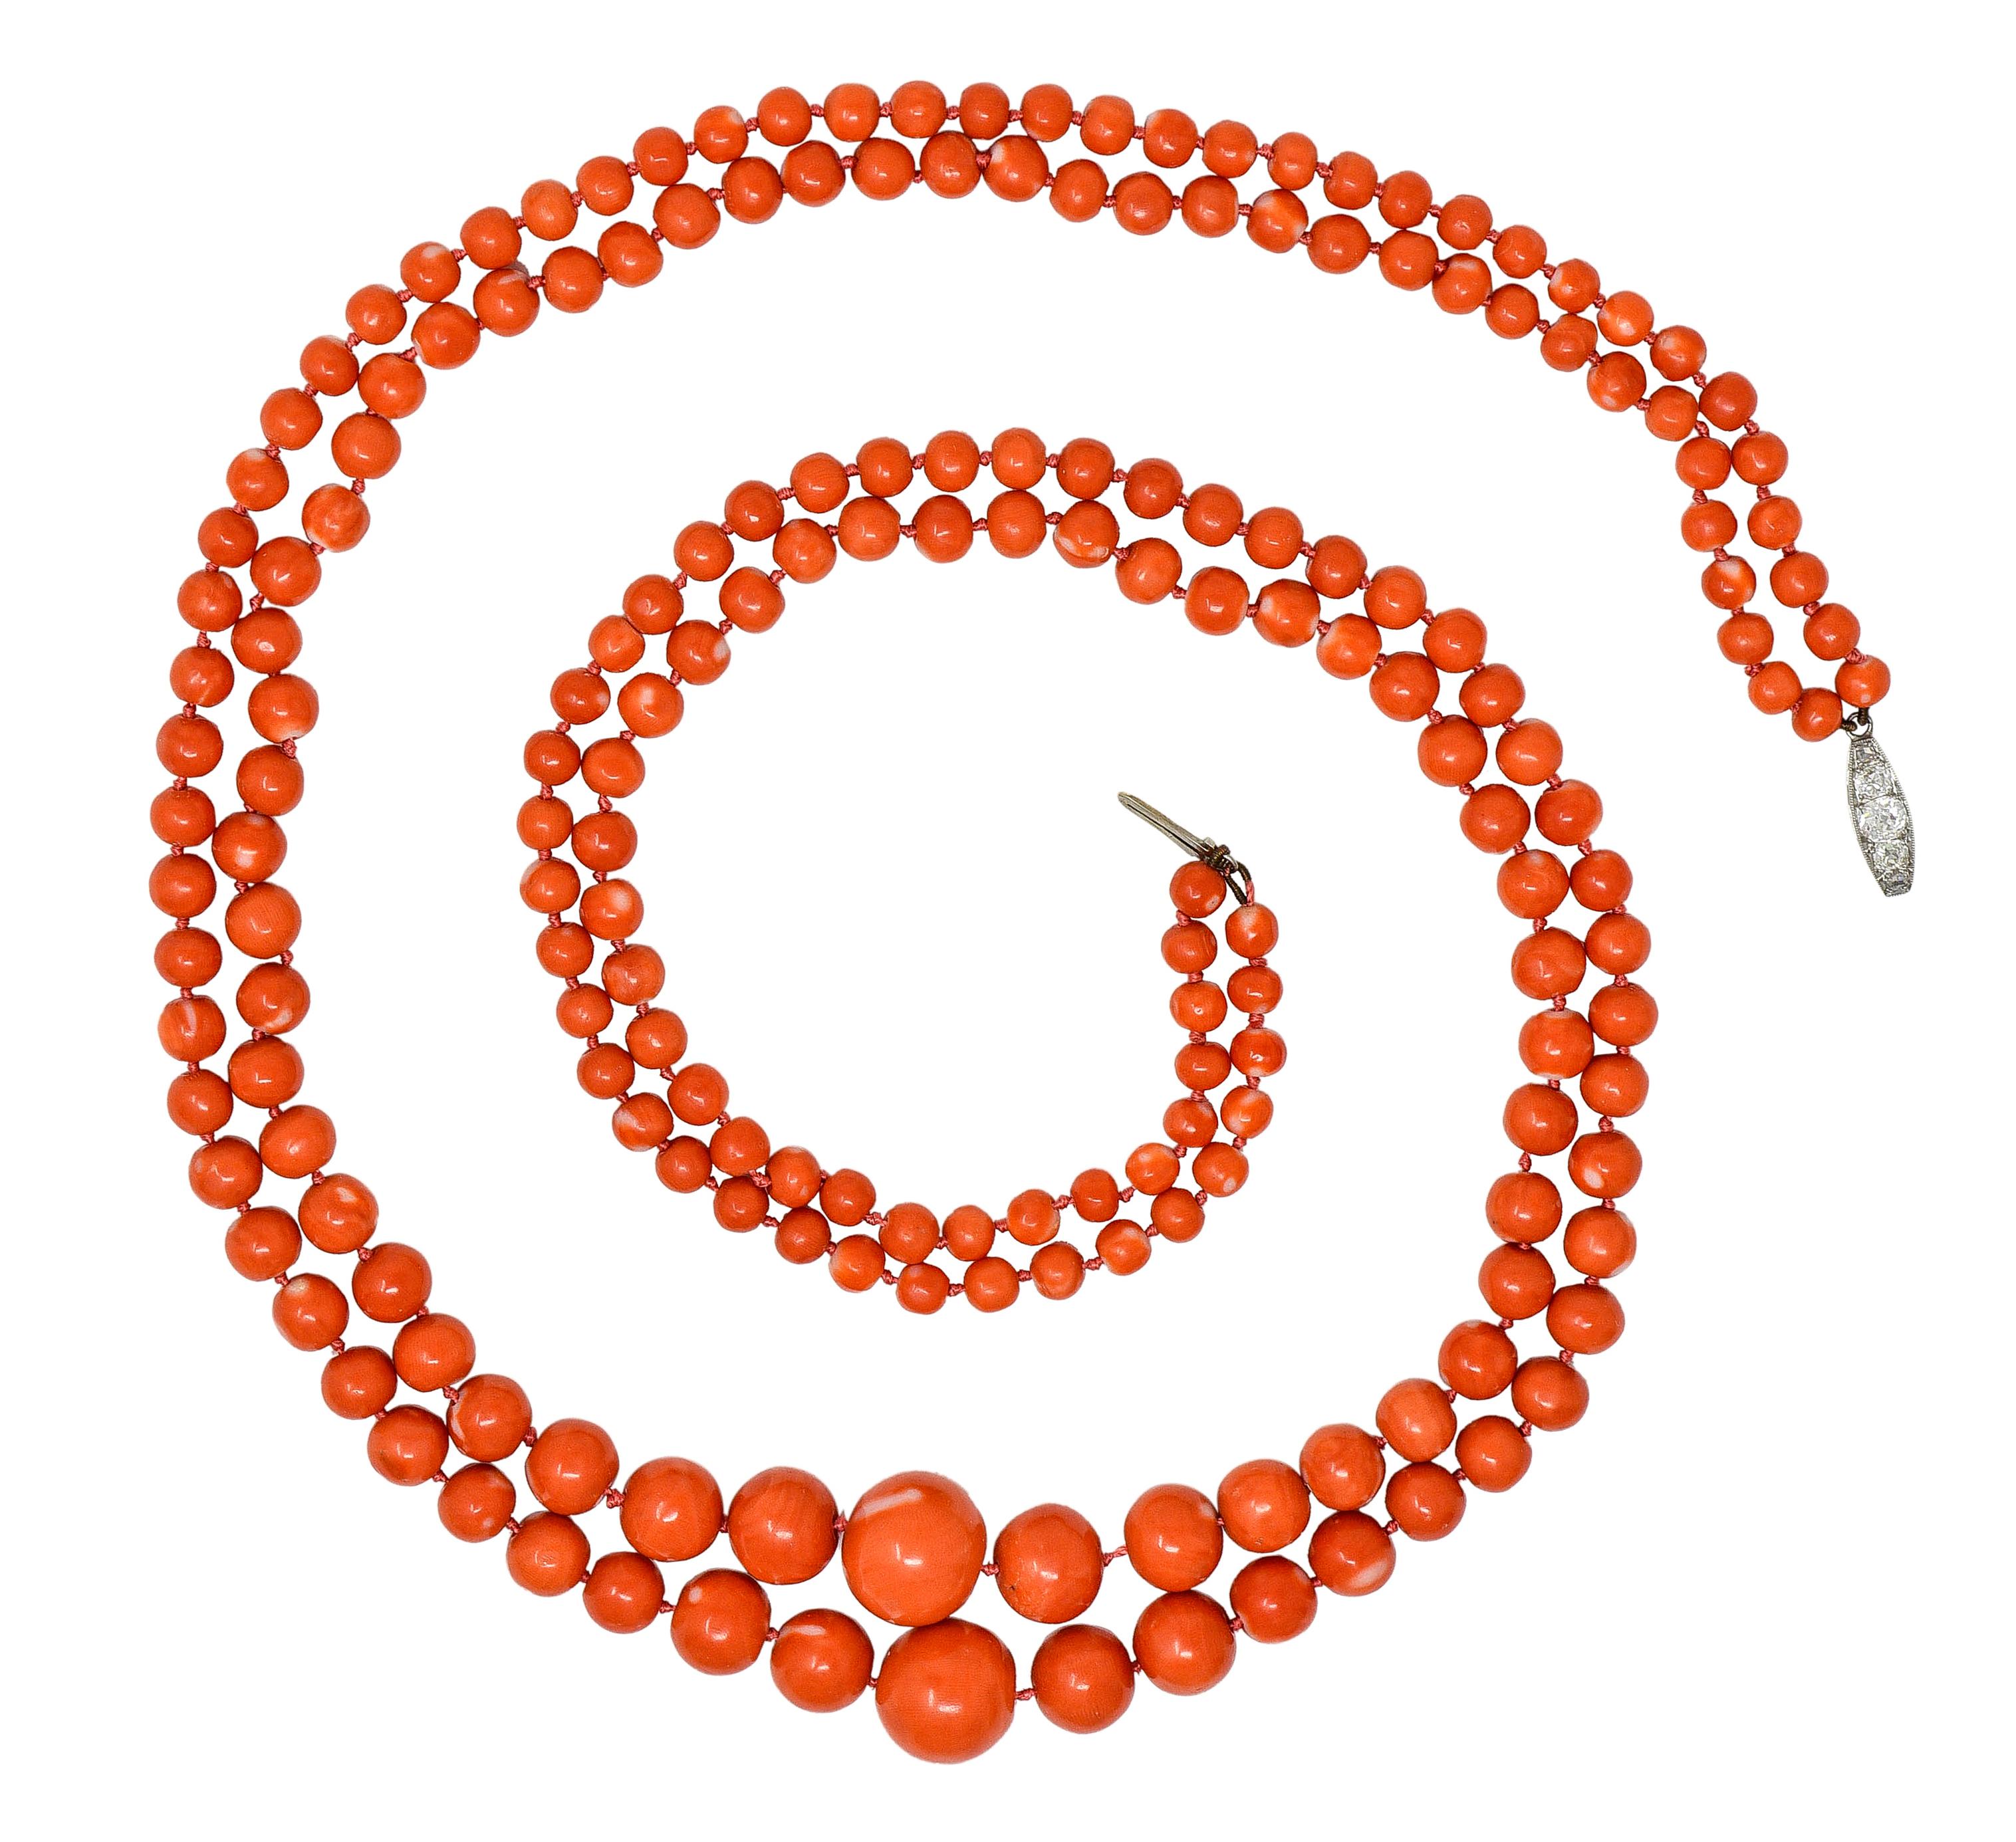 Necklace is comprised of two layered strands of round coral beads strung on knotted silk cord
Graduating in size from 5.5 mm to 15.0 mm - opaque reddish orange with white swirling
Completed by a platinum clasp closure with five old mine and rose cut